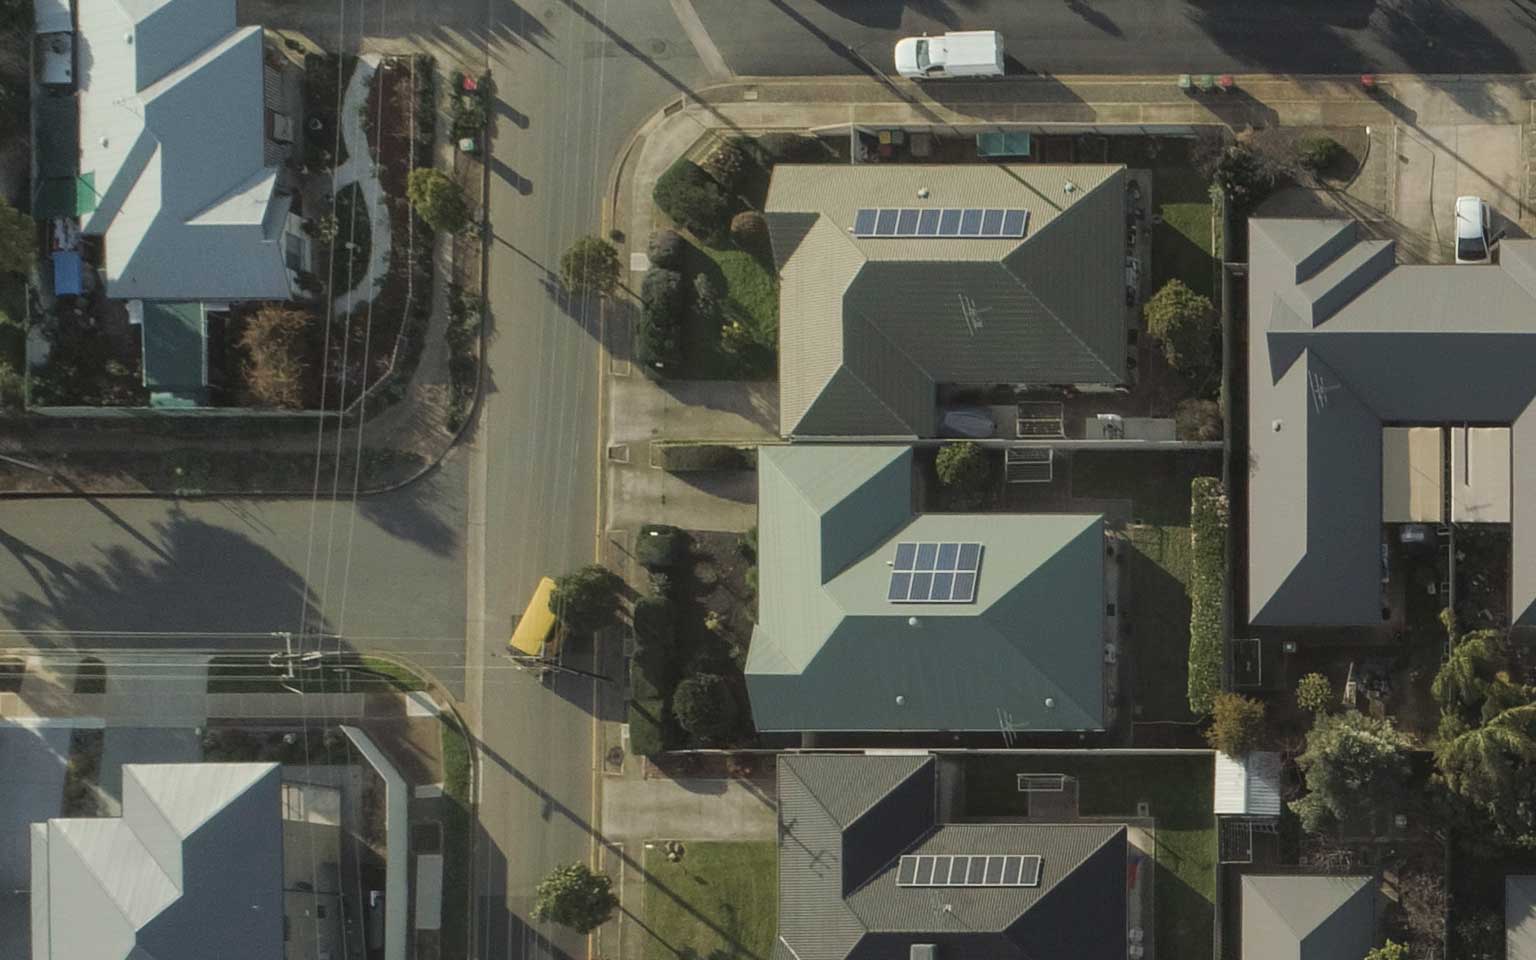 Image - Arial view of residential houses